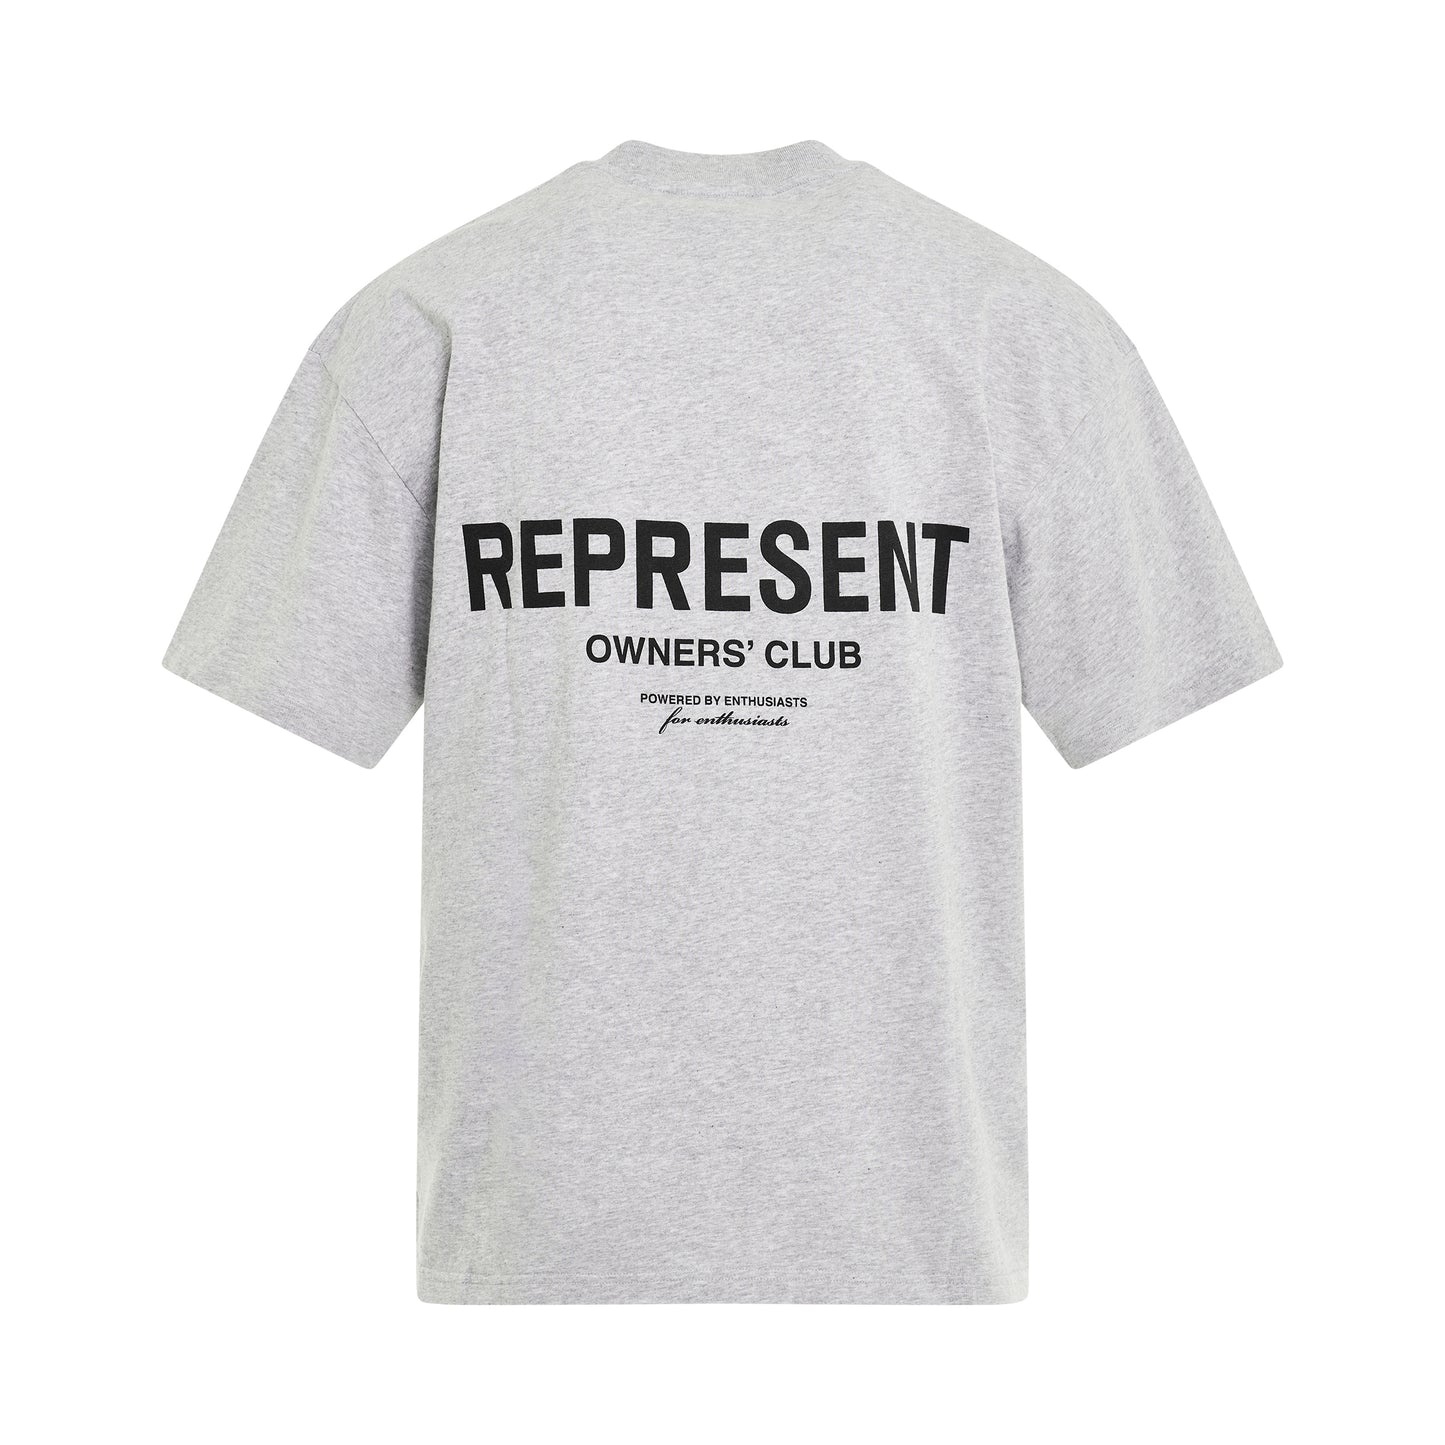 New Represent Owners Club T-Shirt in Ash Grey/Black